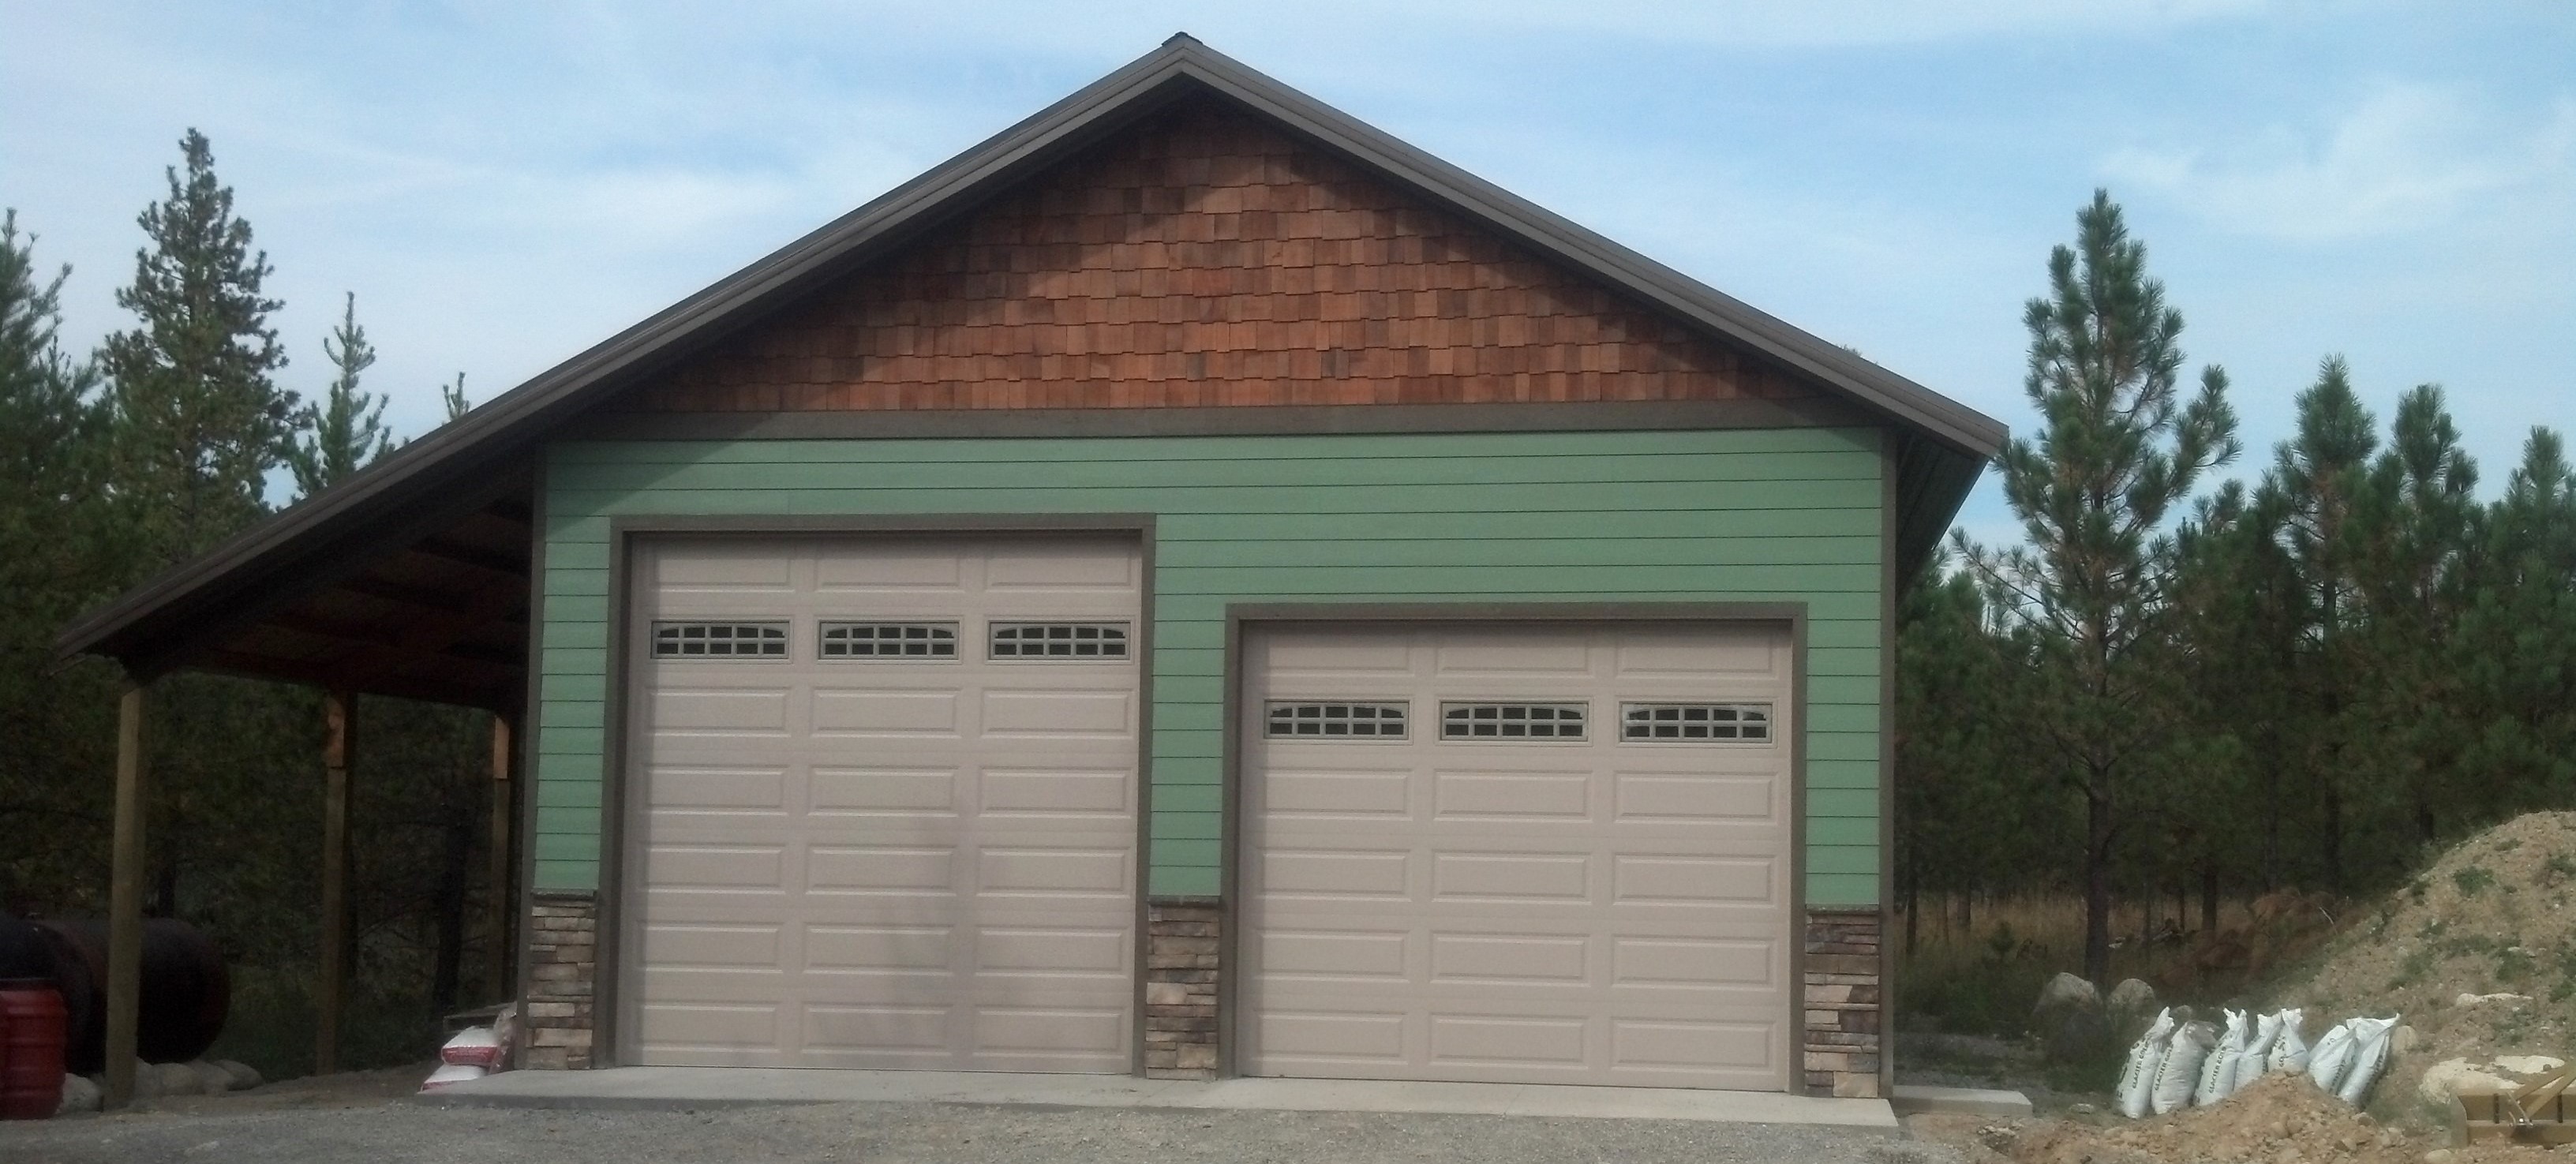 Cda Structures Specializing In Residential Commercial Pole Buildings Shops Garages In Id Wa Mt